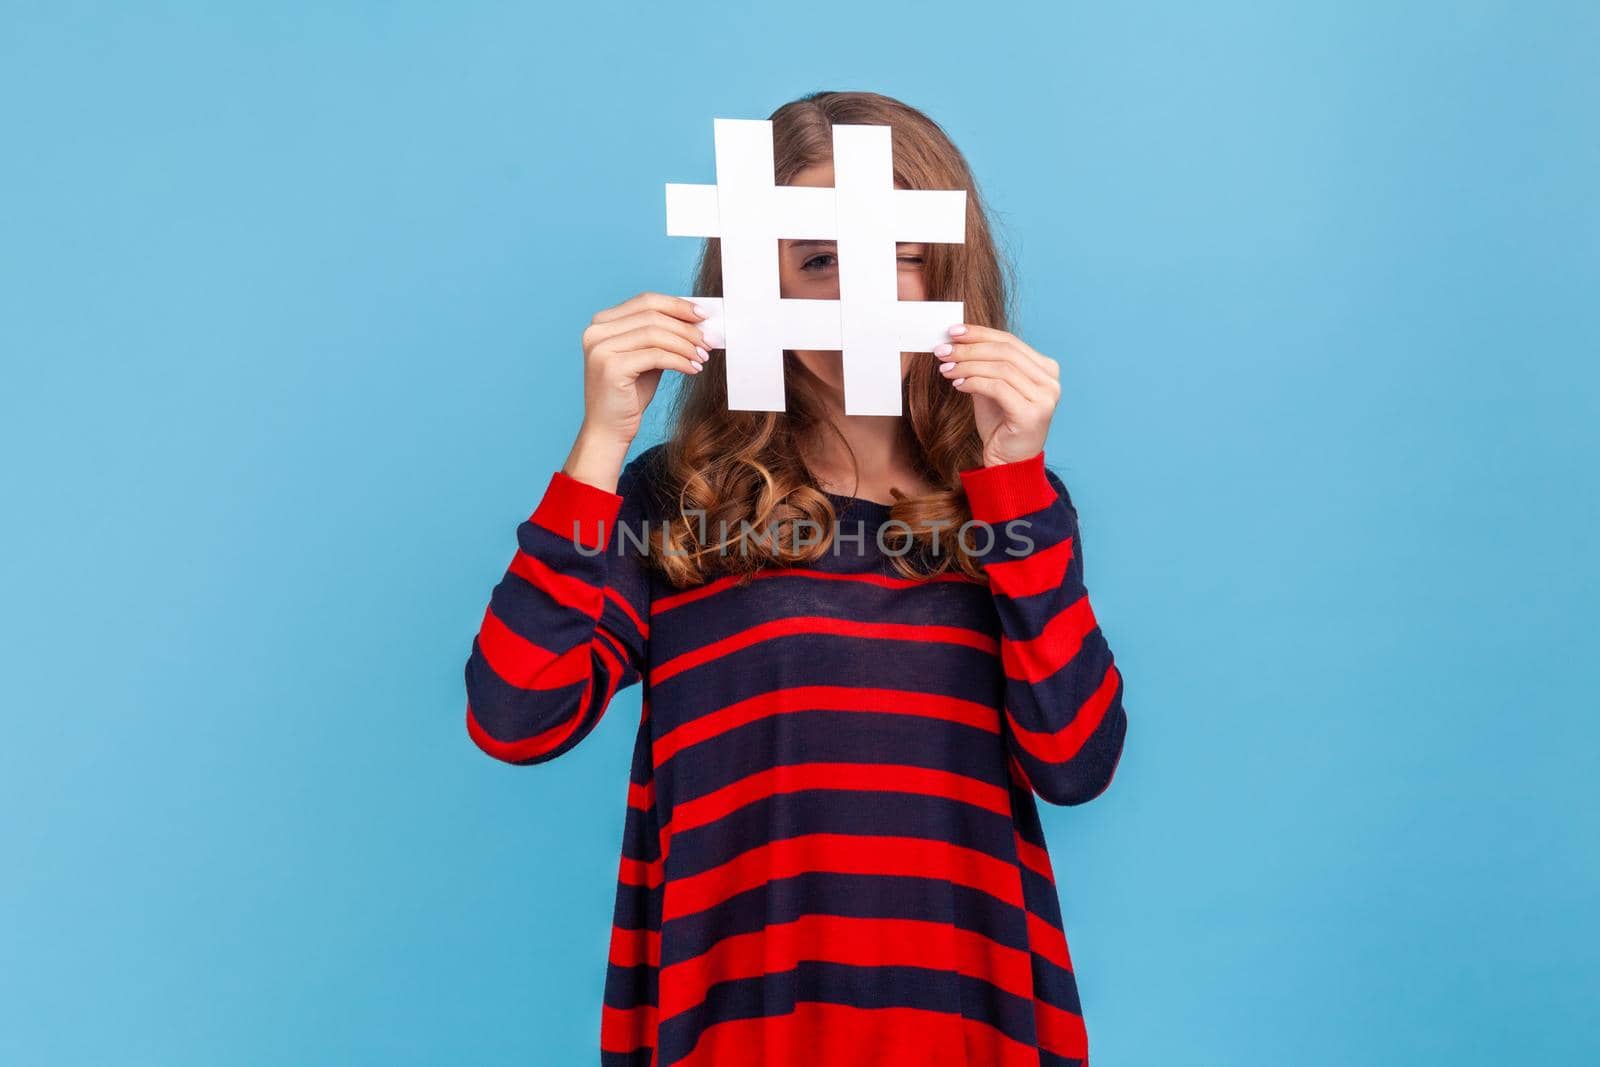 Woman looking at camera through large white hashtag symbol with prying eye, interesting web content. by Khosro1